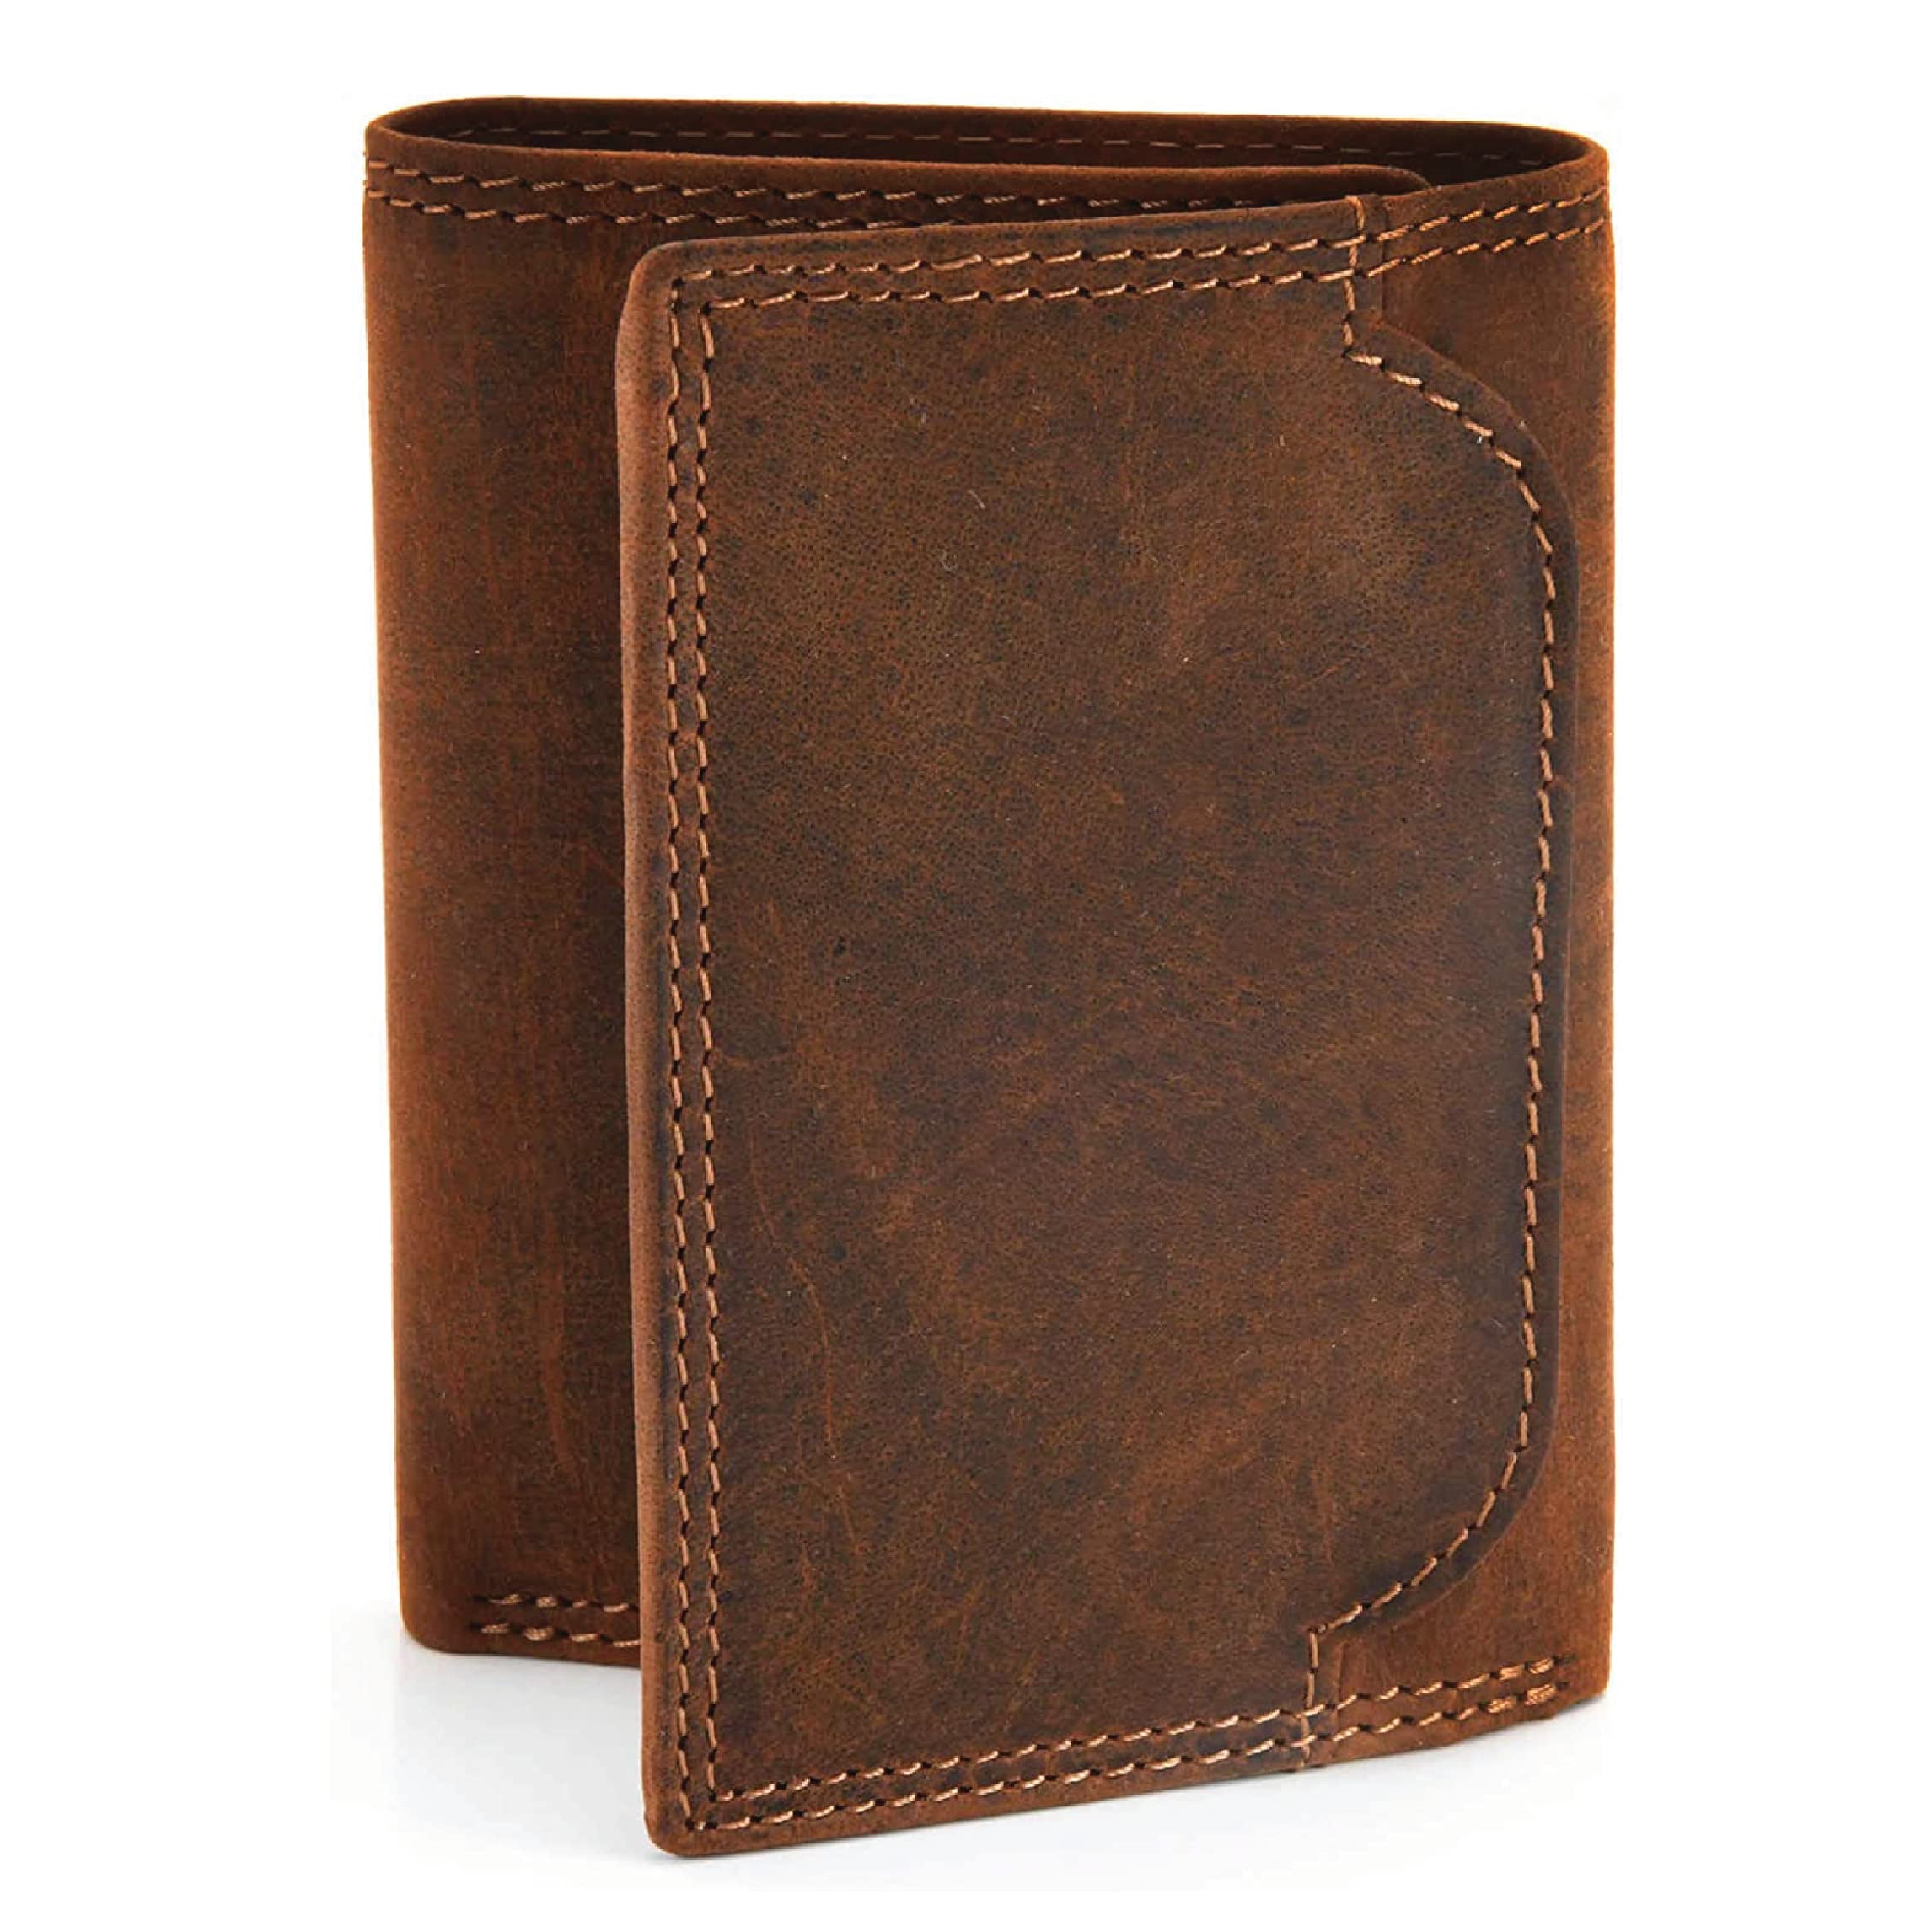 Style n Craft Trifold Leather Wallet, Full-Grain Leather Wallet for Men and Women, RFID-Protected Wallet with Multiple Card Holders, 2 Tone Vintage Effect, Brown (300790-BR)